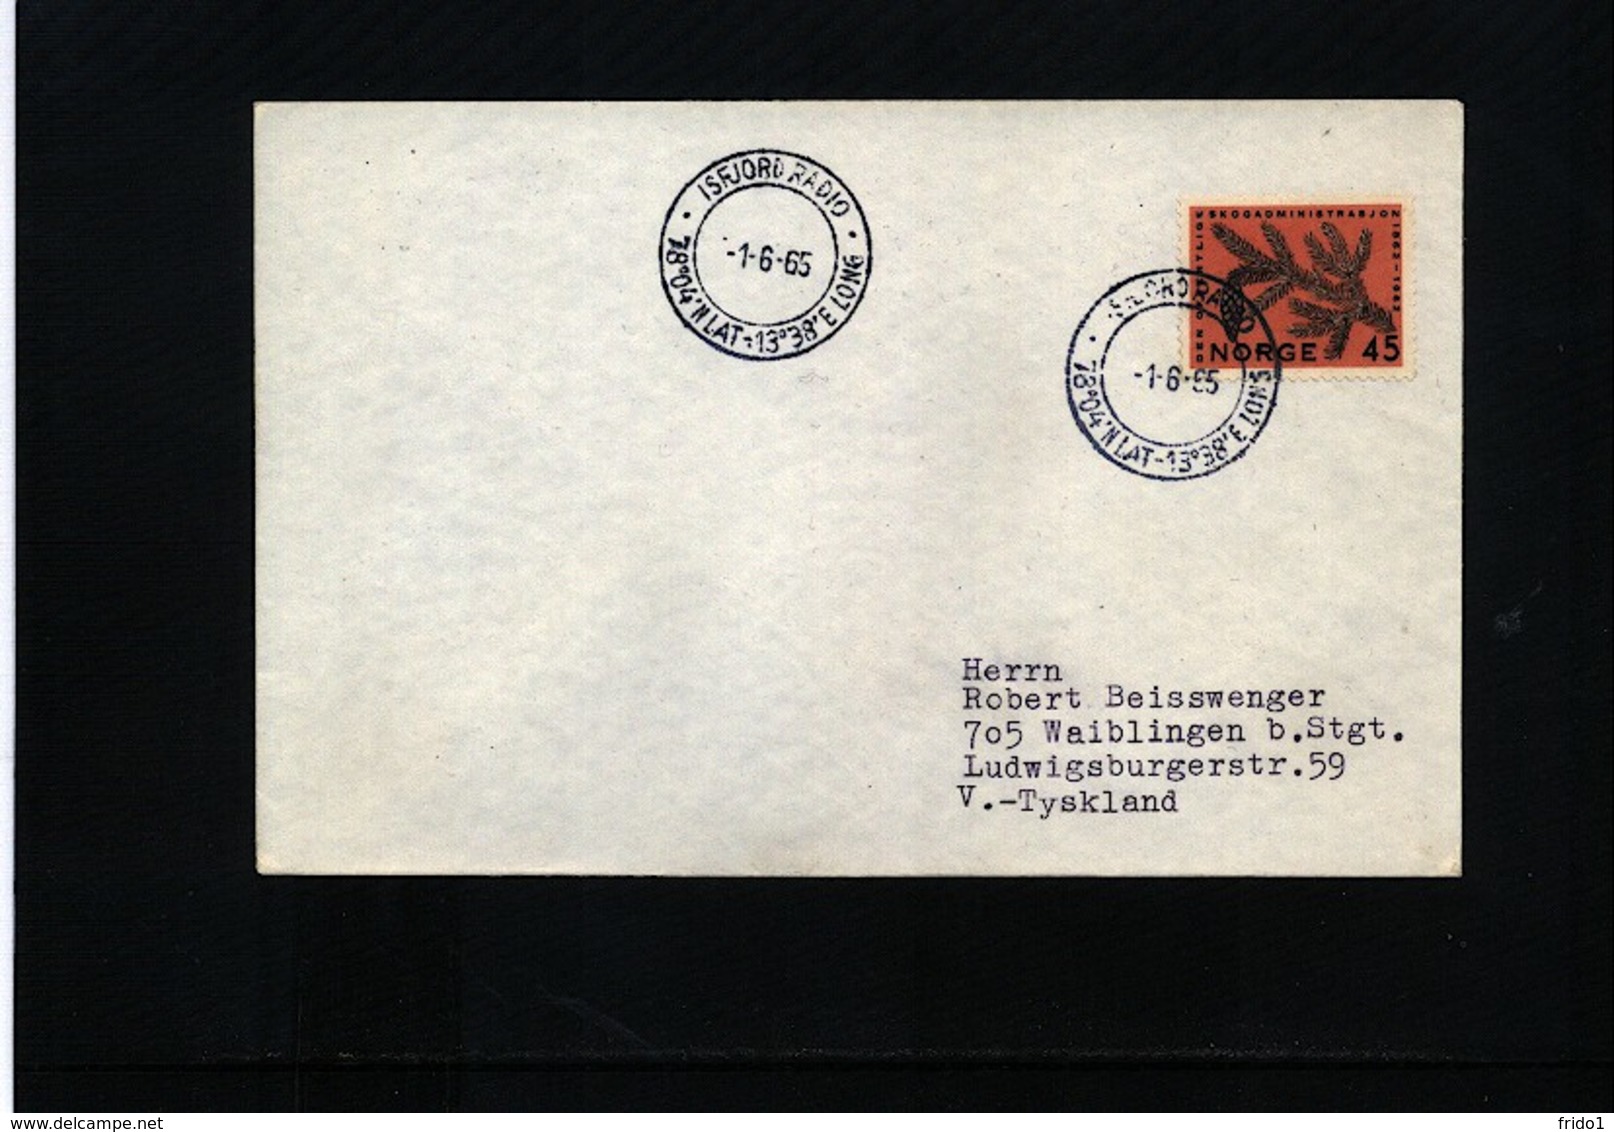 Norway 1965 Isfjord Radio Interesting Letter - Scientific Stations & Arctic Drifting Stations